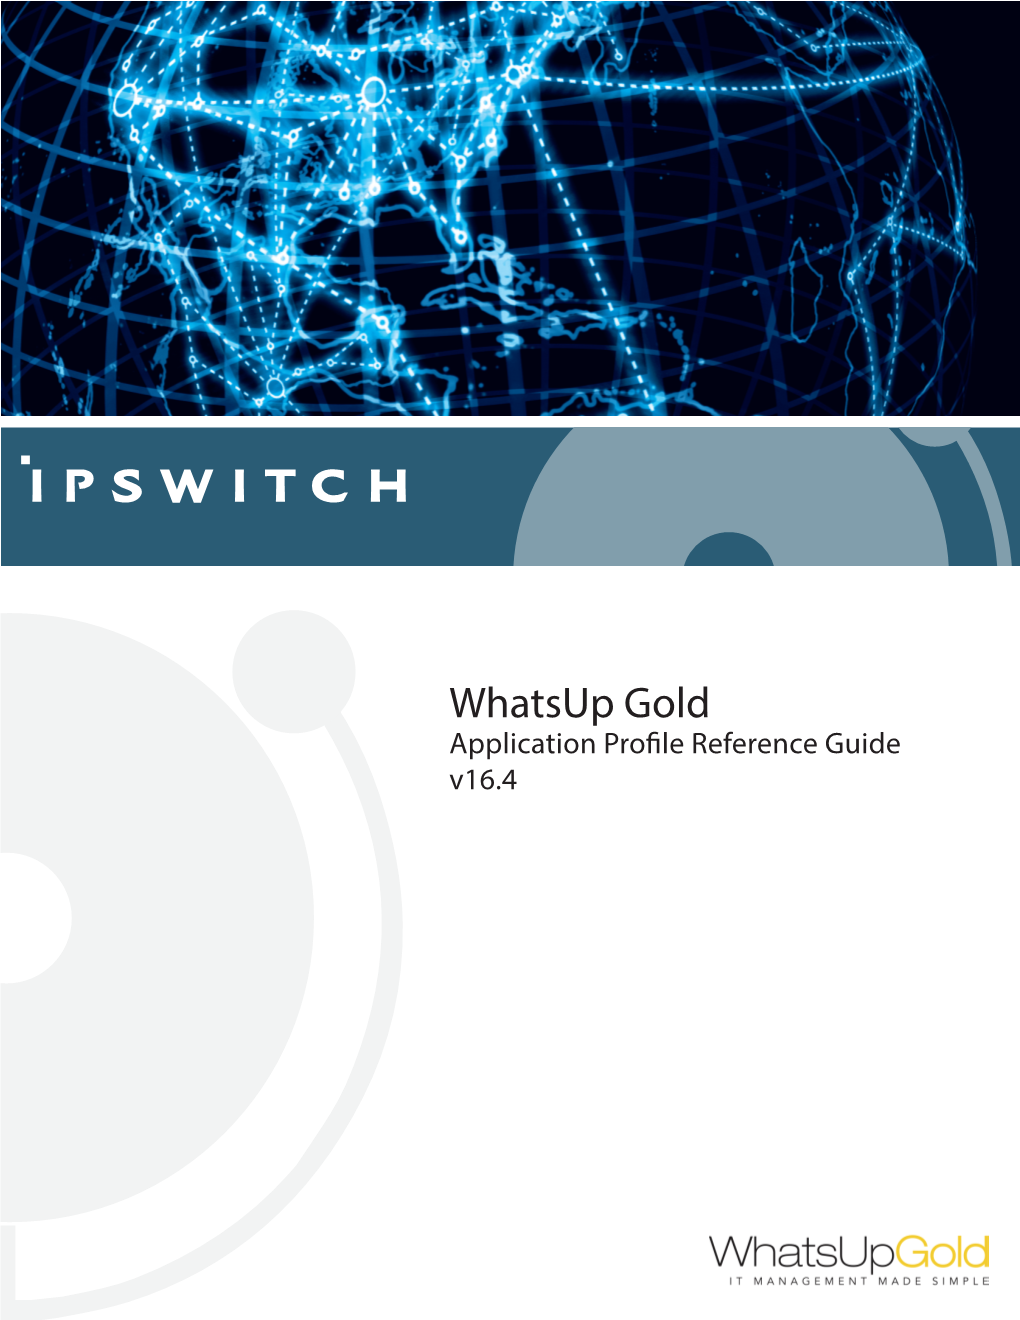 Whatsup Gold Application Pro Le Reference Guide V16.4